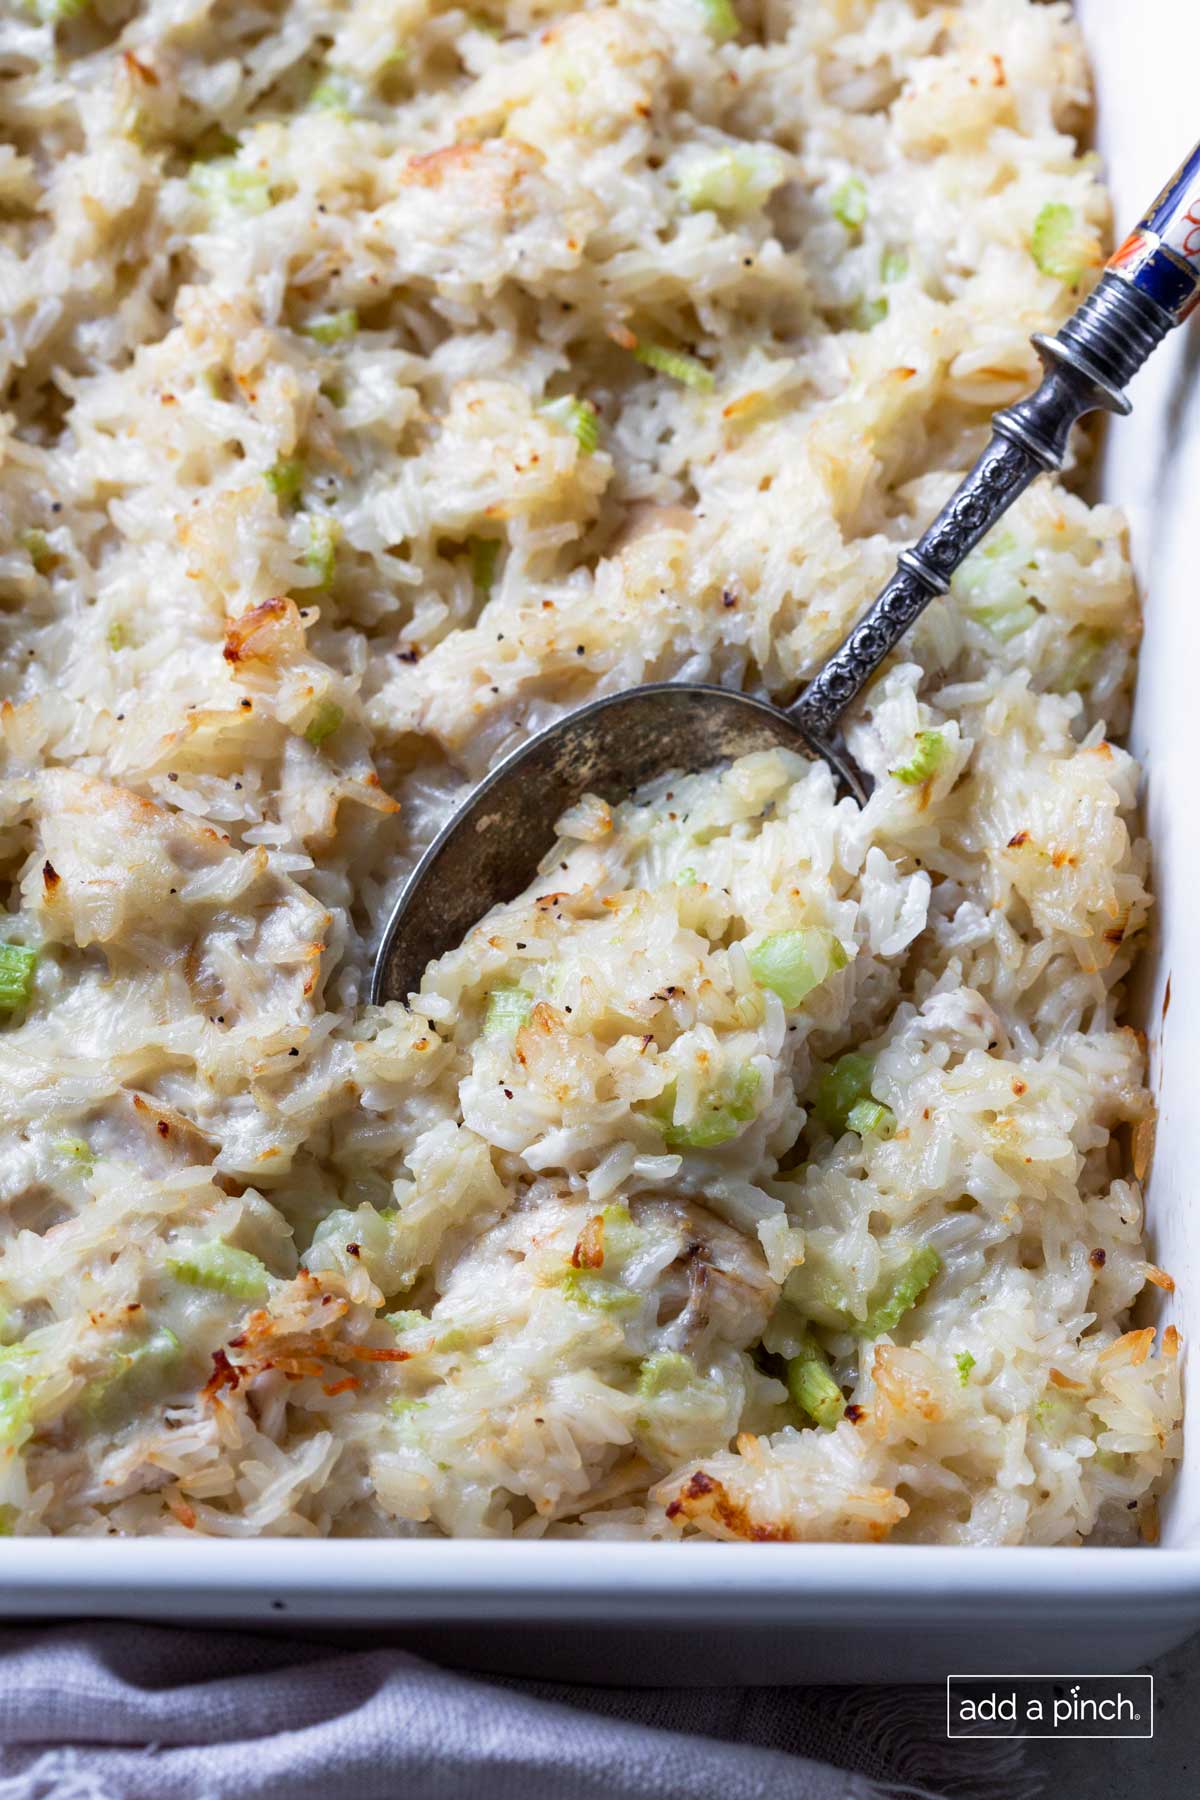 Photo of chicken rice casserole in a baking dish with a spoon ready for serving.